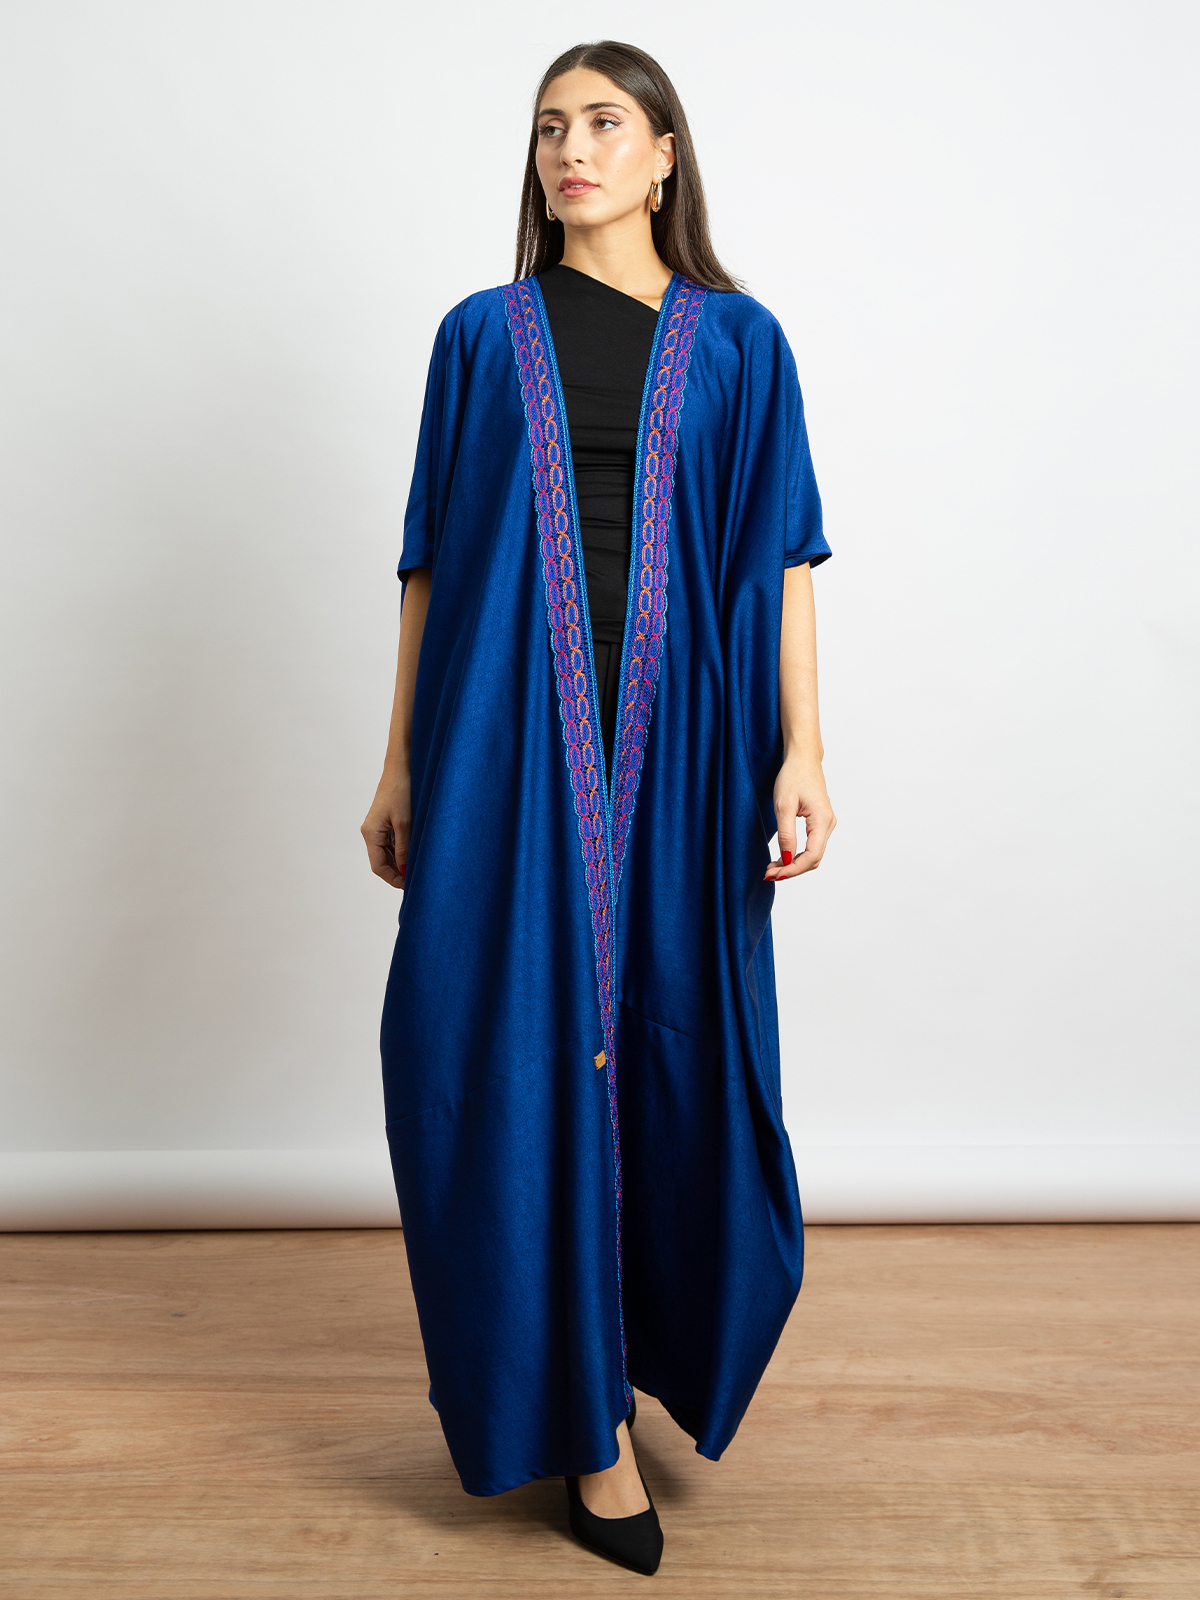 Indigo Blue with Colorful Art Piece - Elbow Length Bisht Abaya in Soft & Silky Fabric